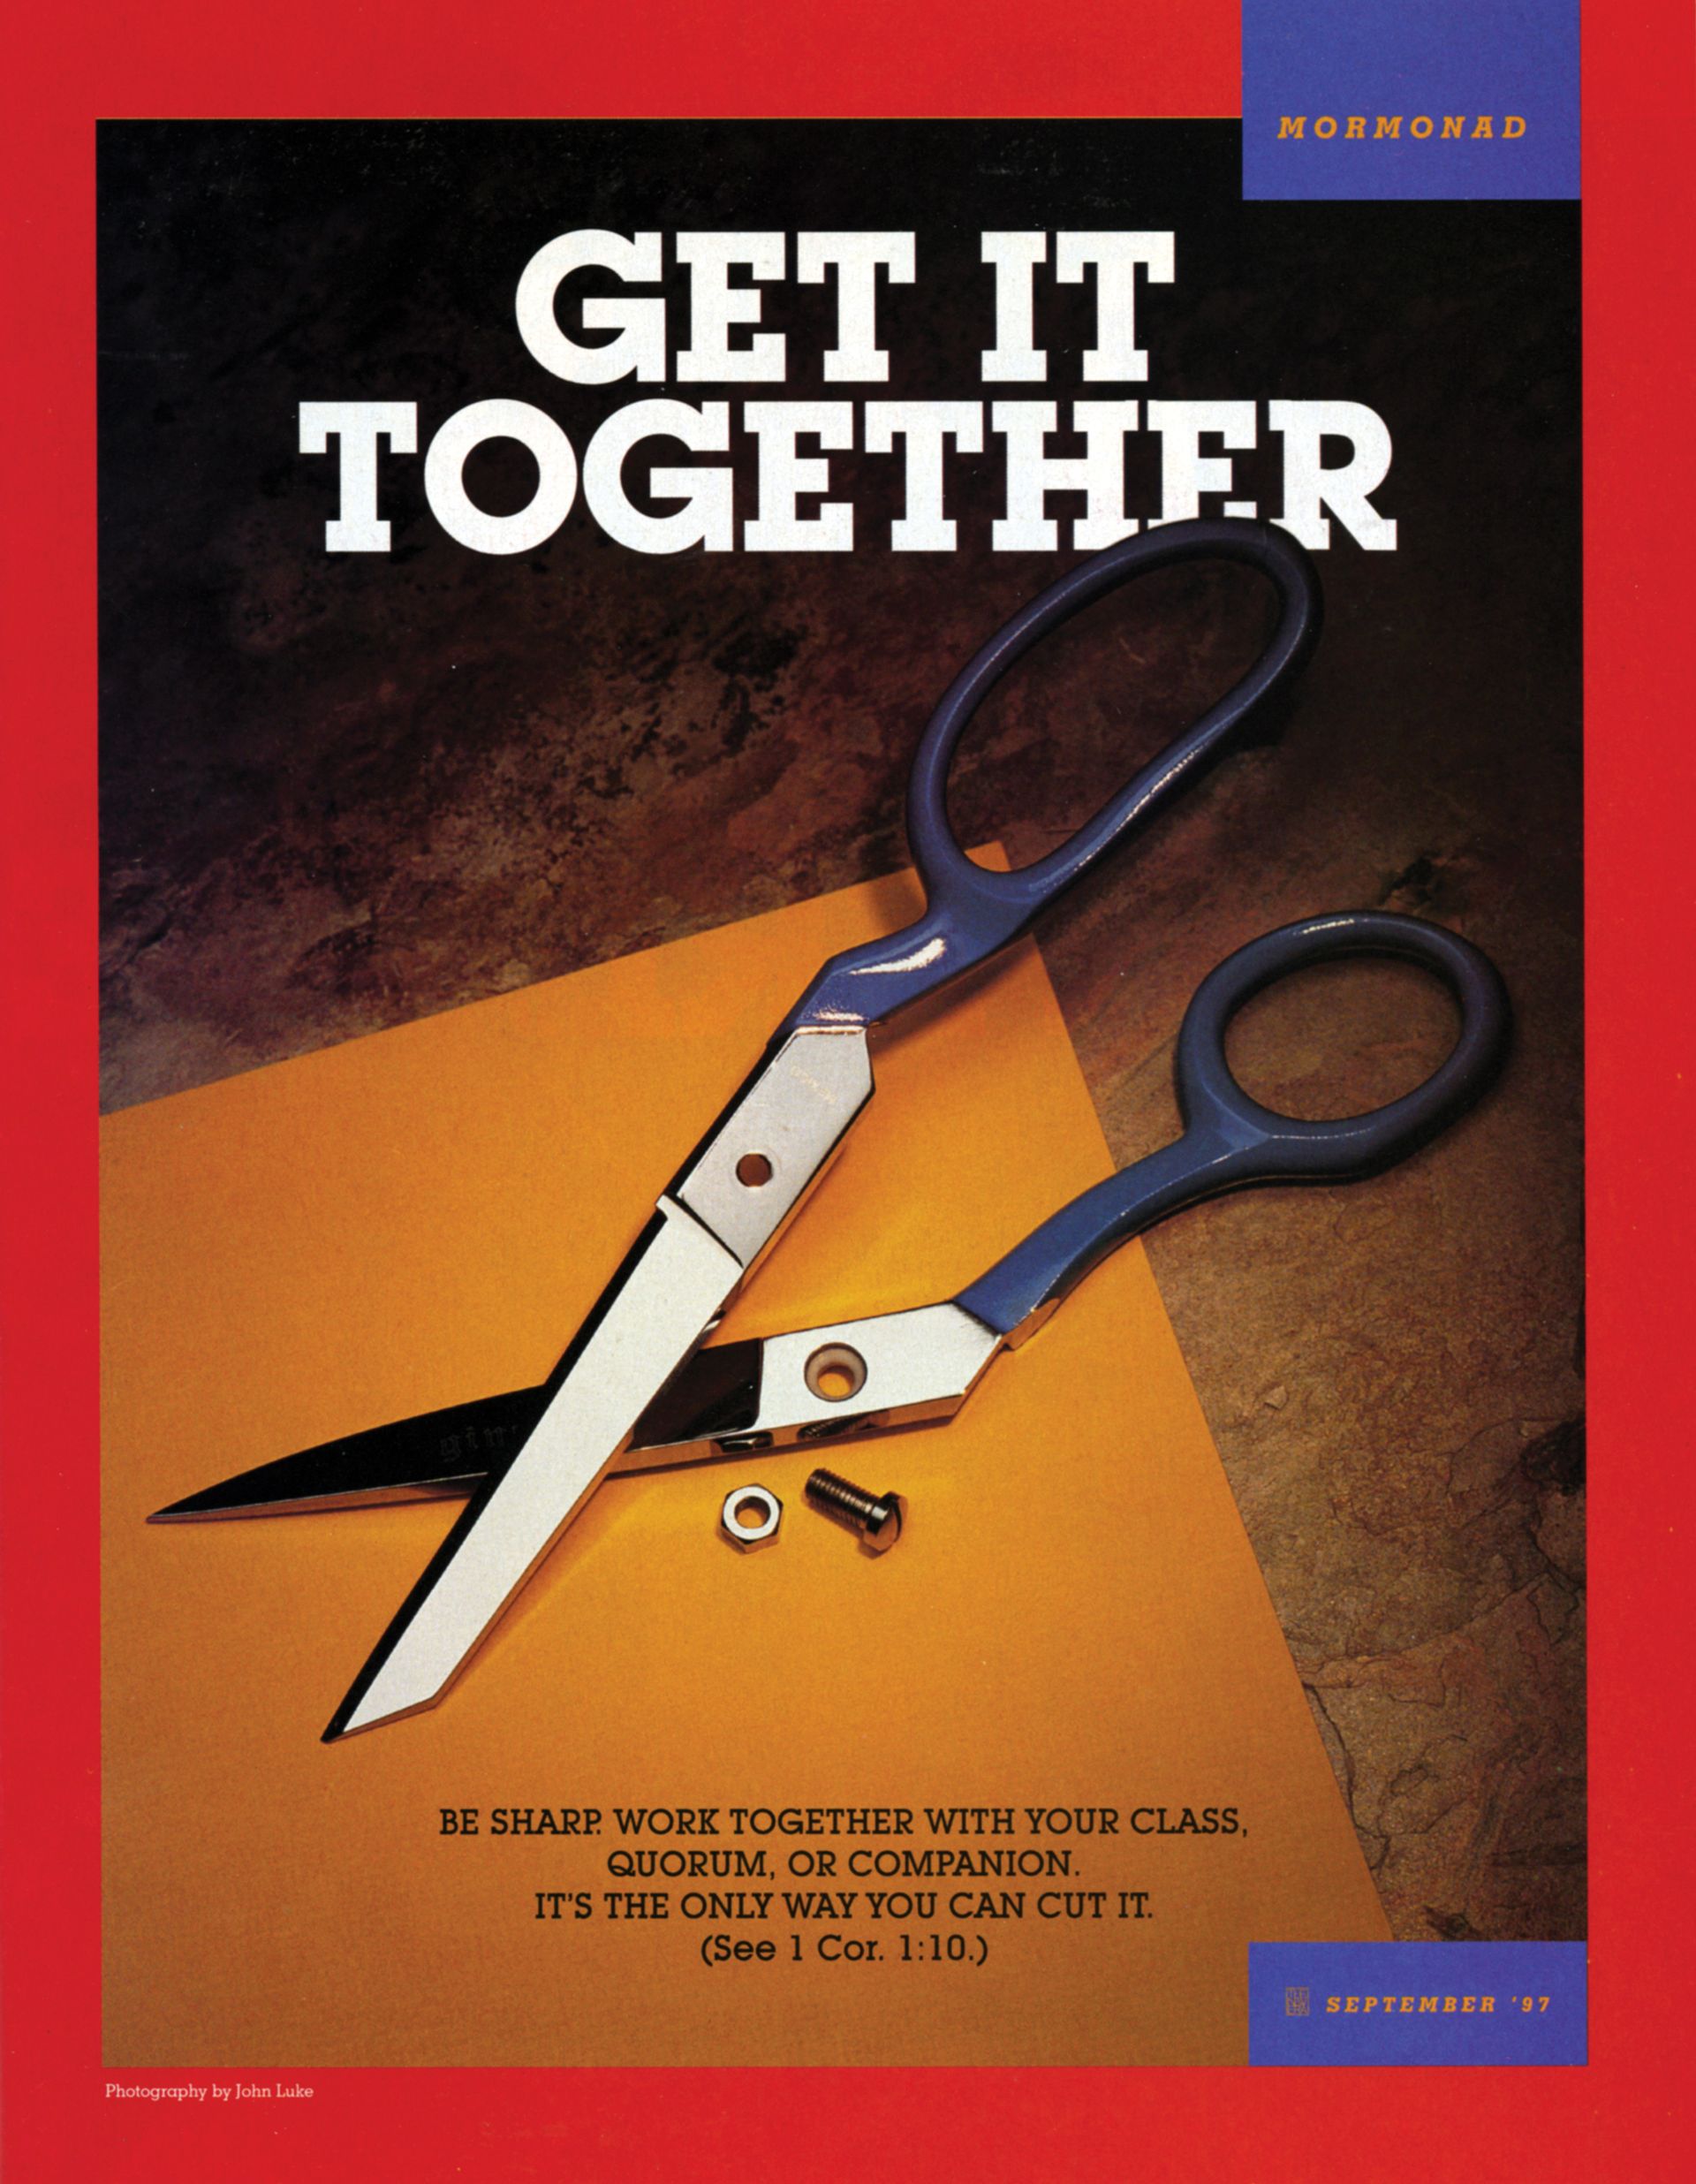 Get It Together. Be sharp. Work together with your class, quorum, or companion. It’s the only way you can cut it. (See 1 Cor. 1:10.) Sept. 1997 © undefined ipCode 1.